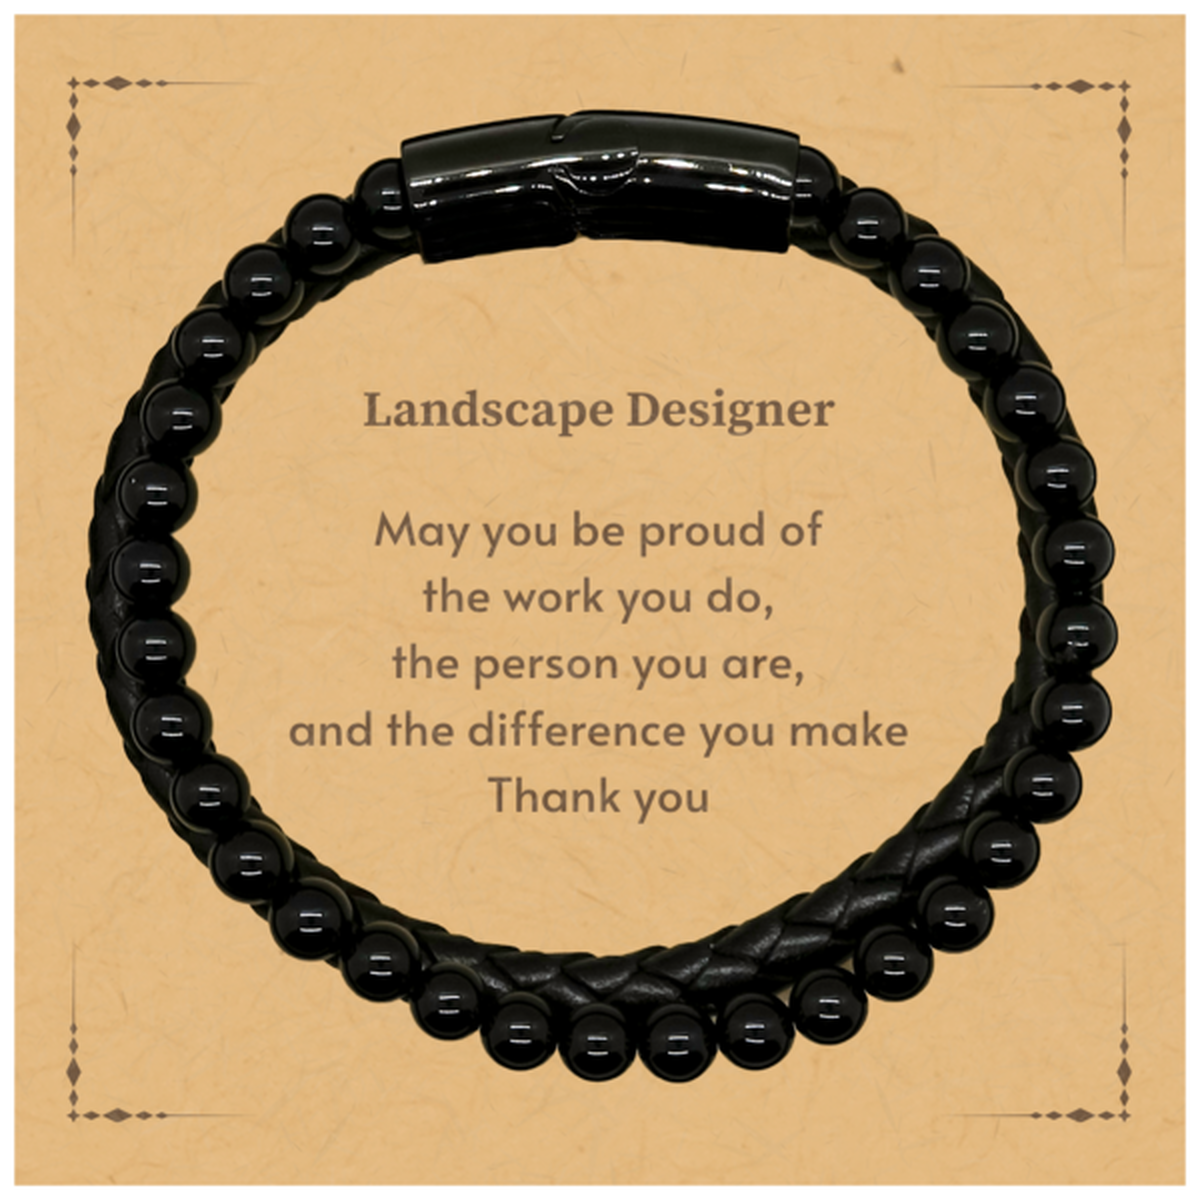 Heartwarming Stone Leather Bracelets Retirement Coworkers Gifts for Landscape Designer, Landscape Designer May You be proud of the work you do, the person you are Gifts for Boss Men Women Friends